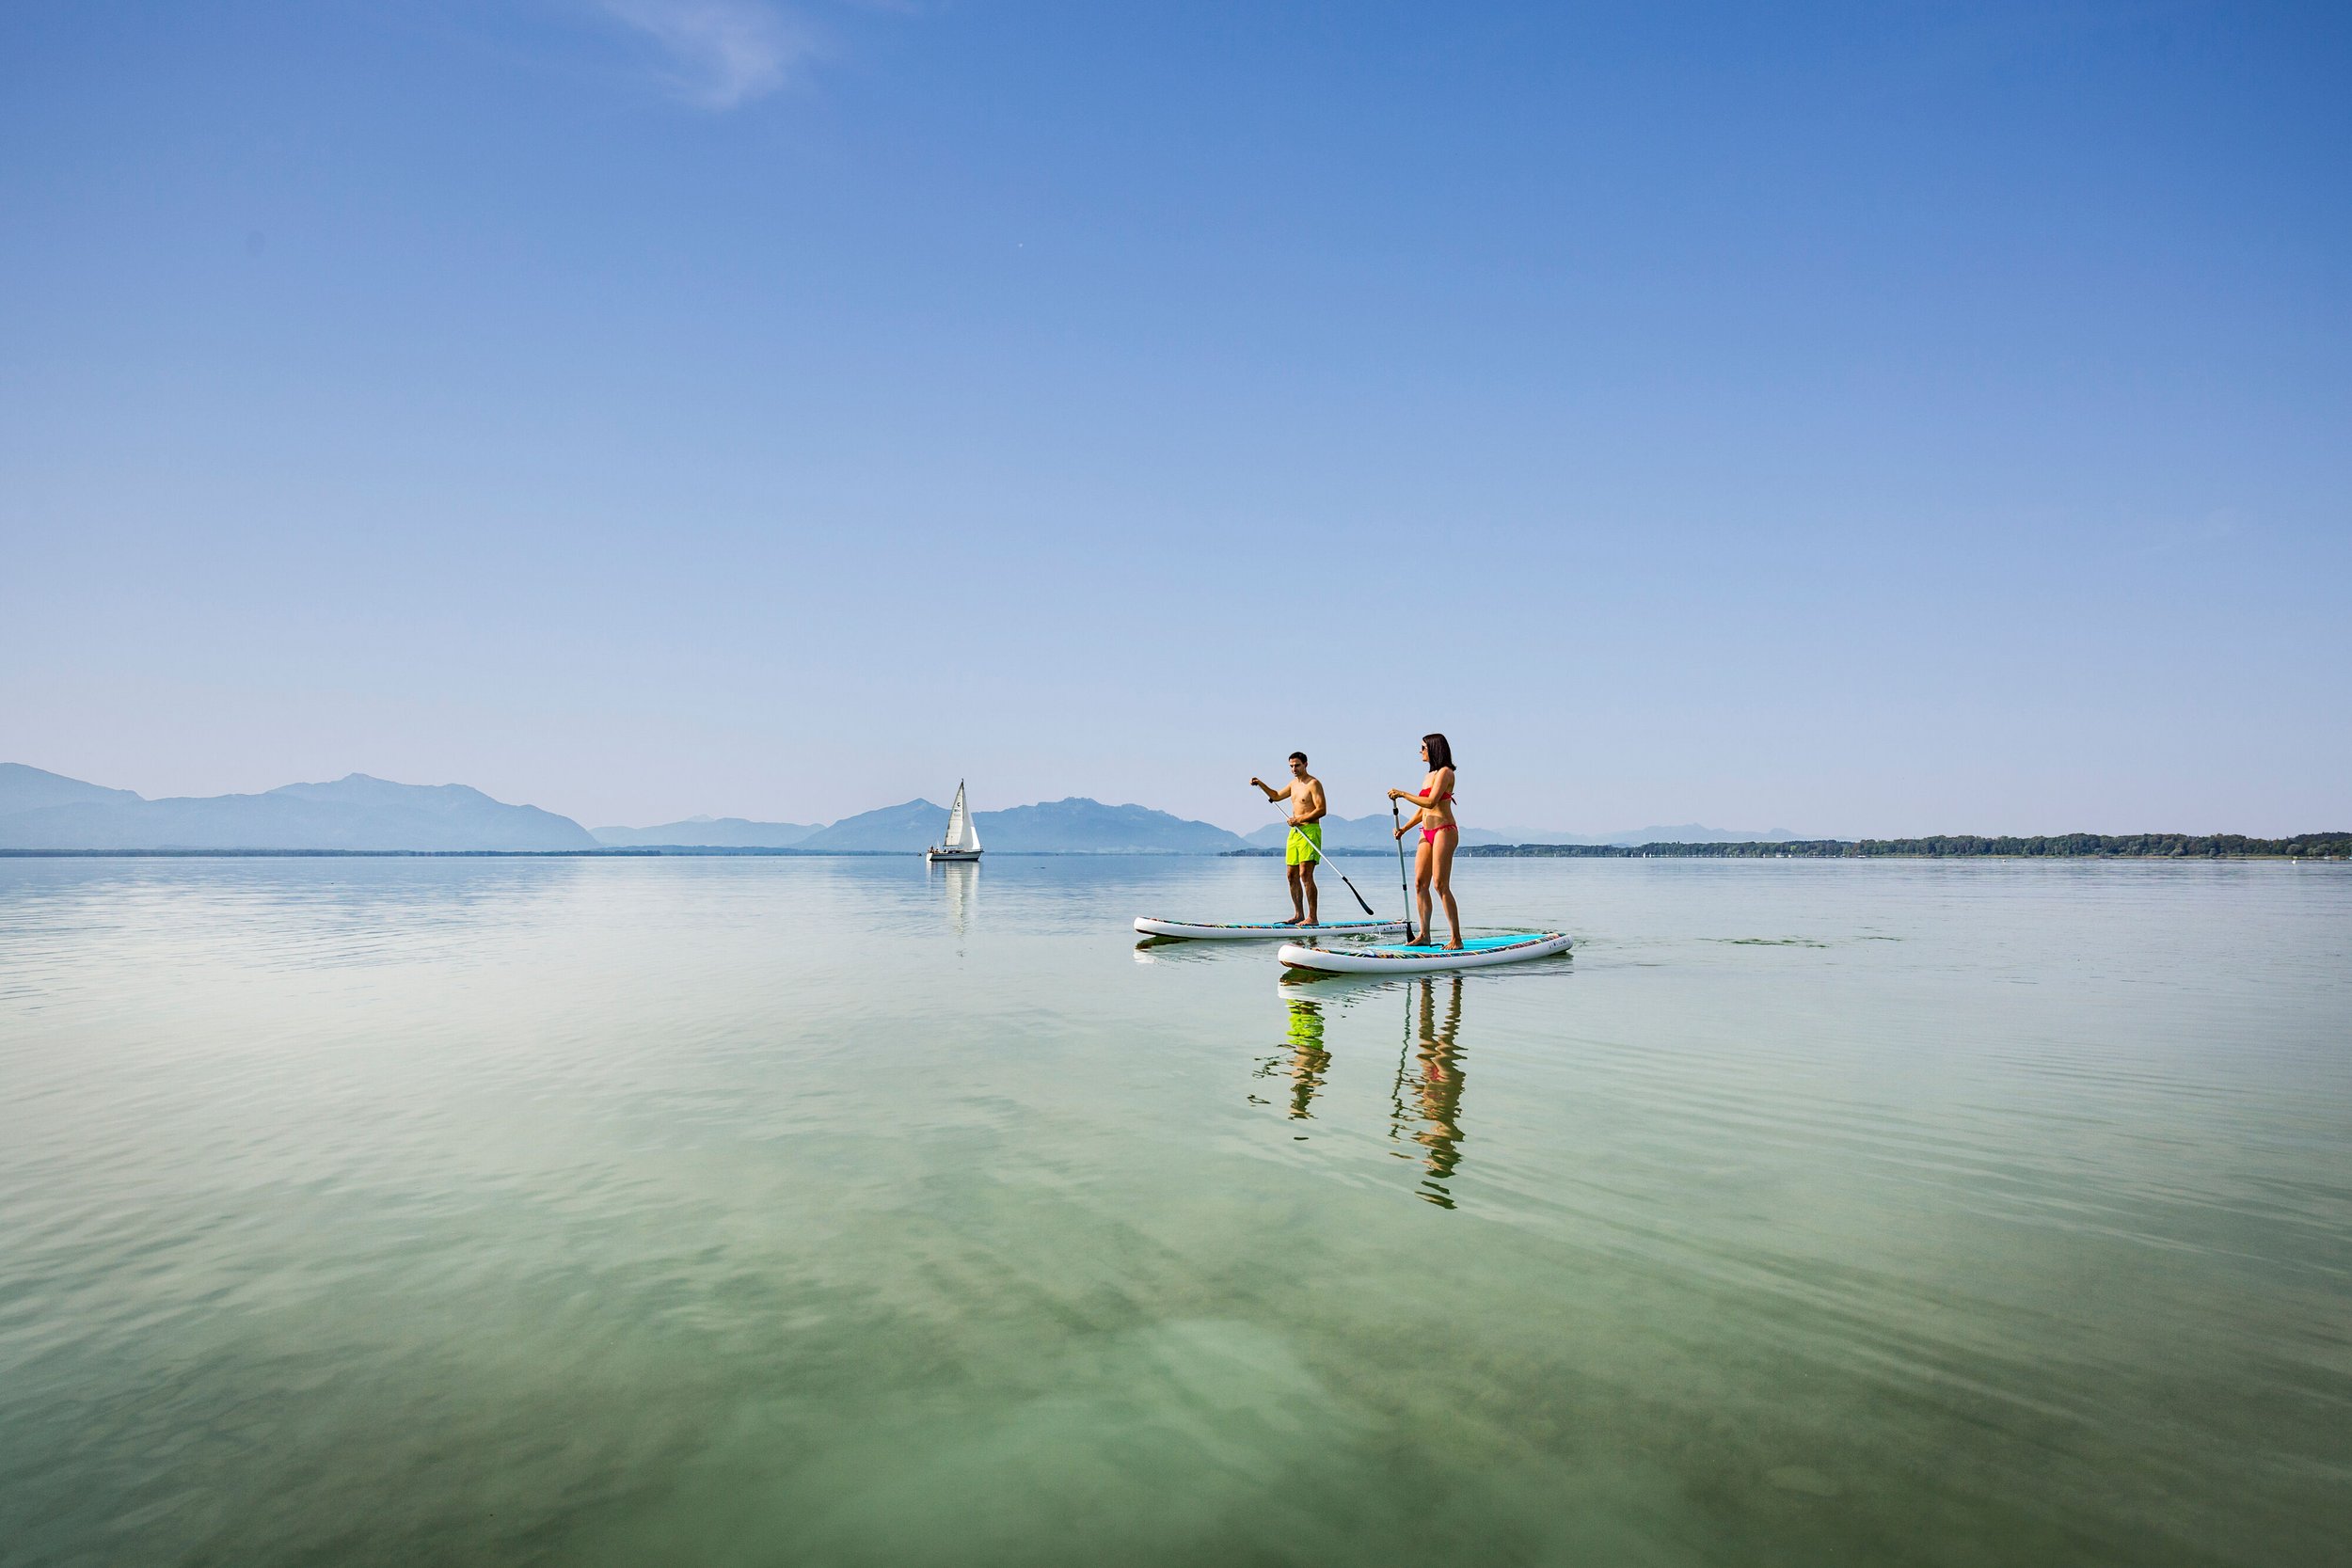 Stand-up paddling on the Chiemsee